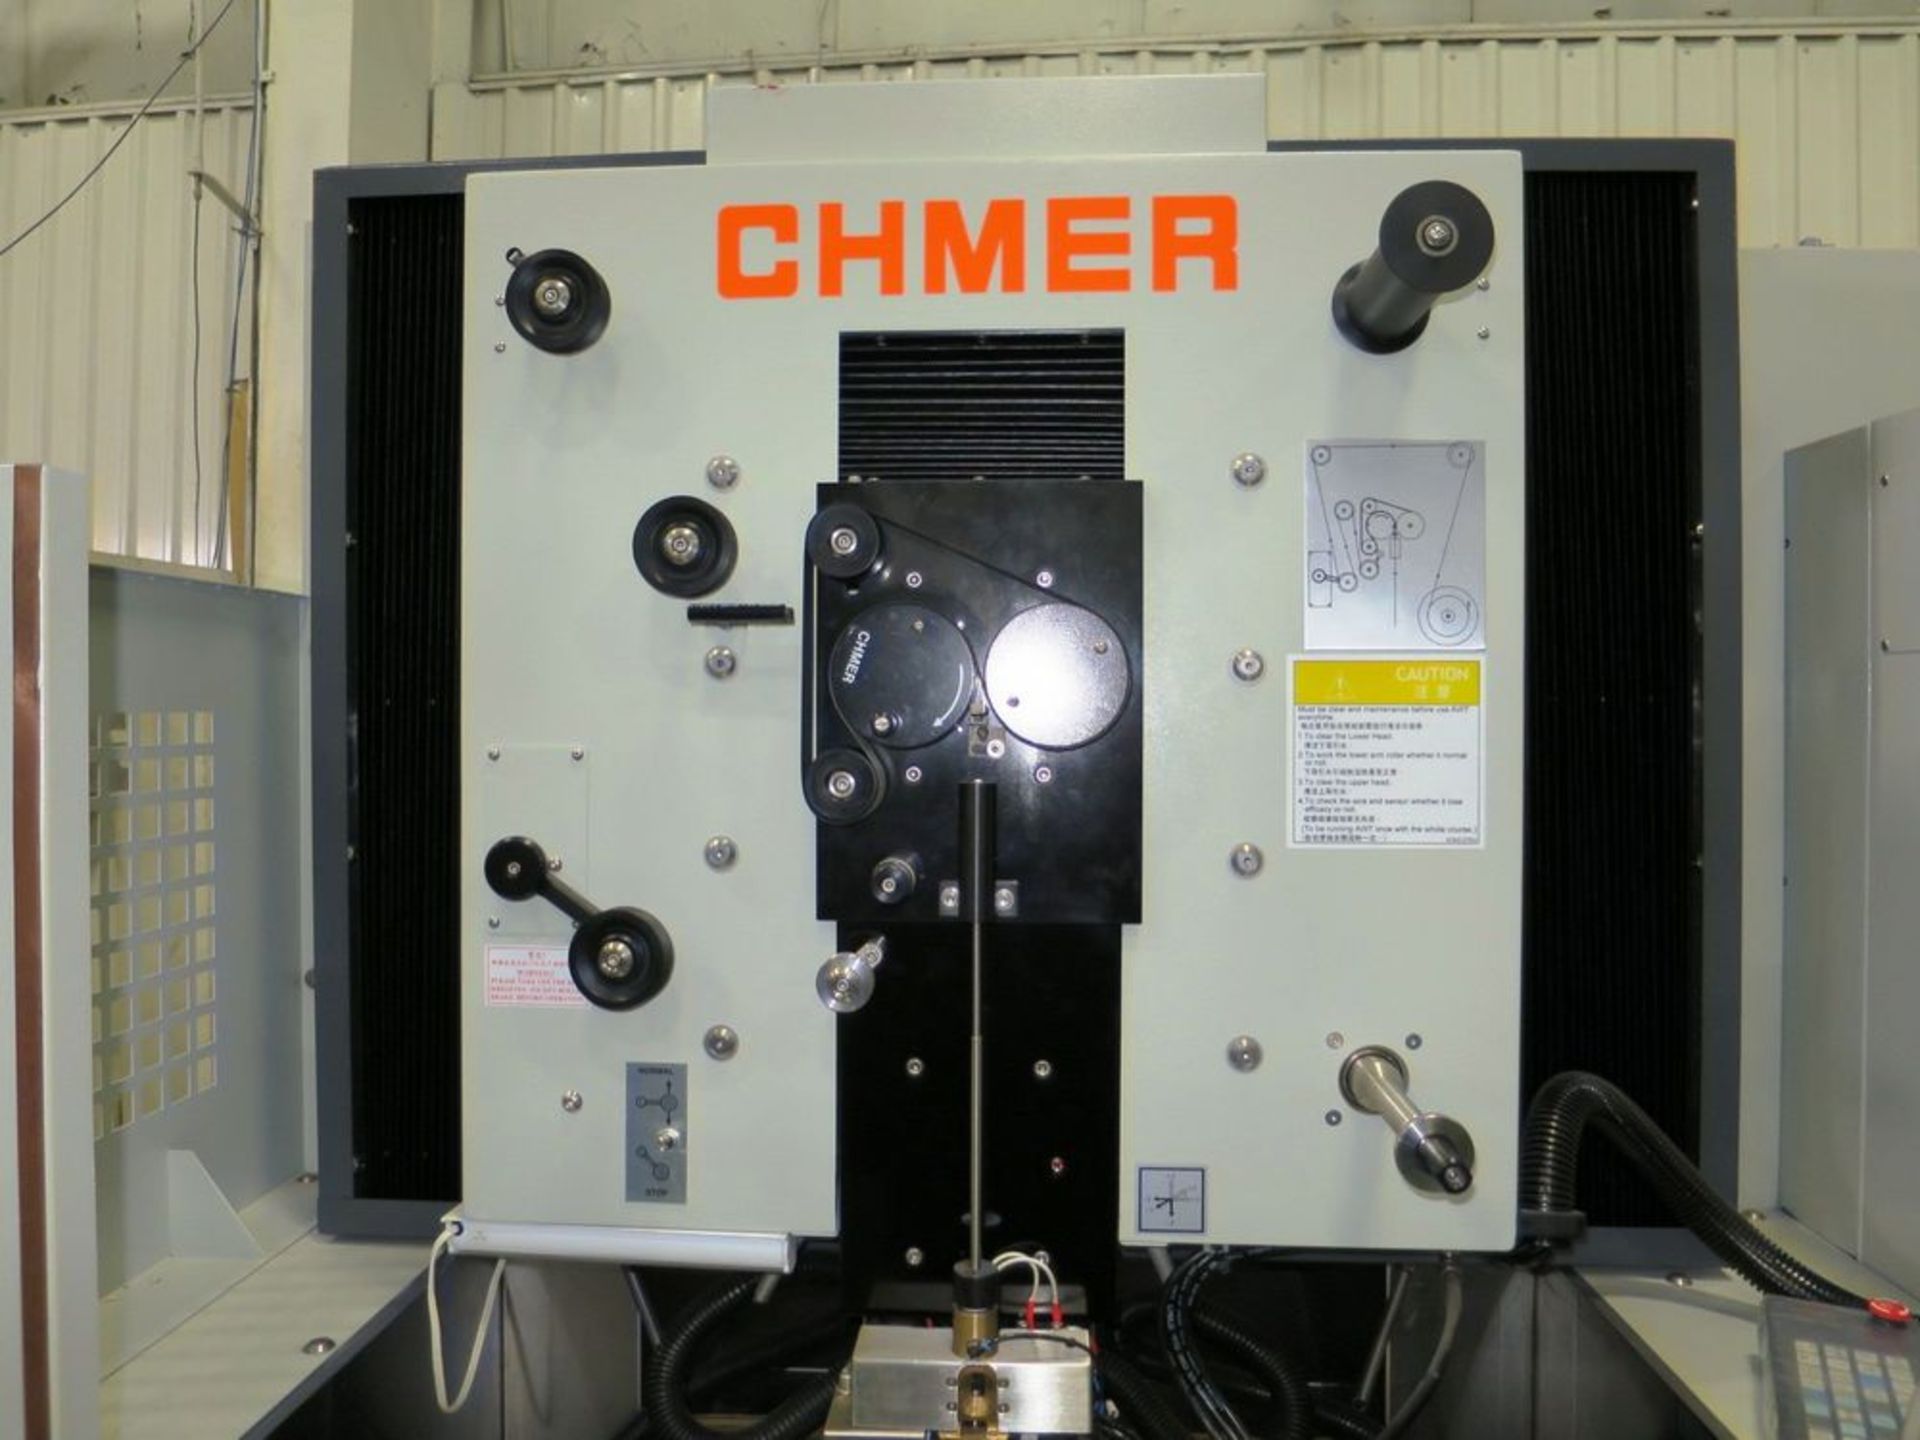 Chmer A422SL CNC Wire EDM Machine "NEW and Un-Used", S/N 1110693, New 2012 General Specifications, - Image 7 of 25